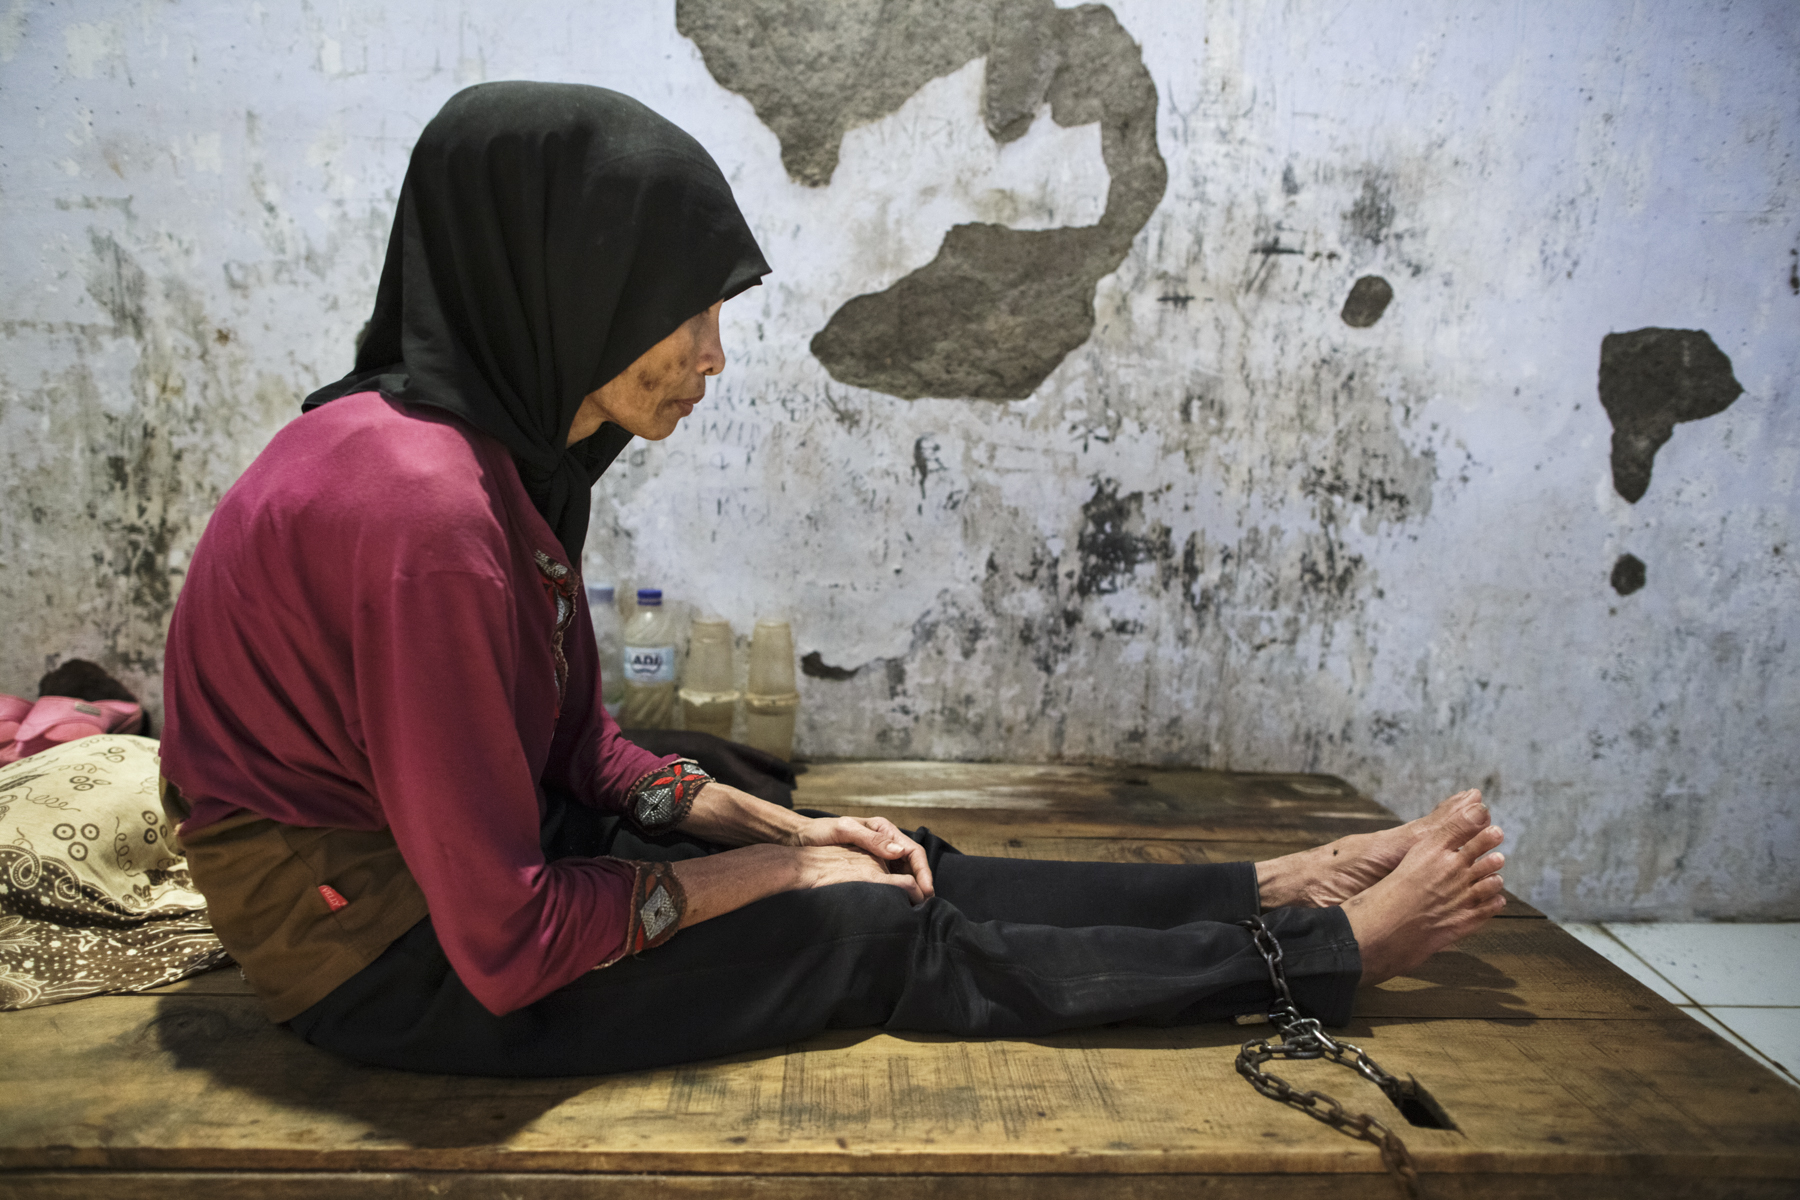 A young woman with a real or perceived psychosocial disability sits with her ankle chained to a platform bed at Bina Lestari faith healing center in Brebes, Central Java. Photo: Andrea Star Reese for Human Rights Watch